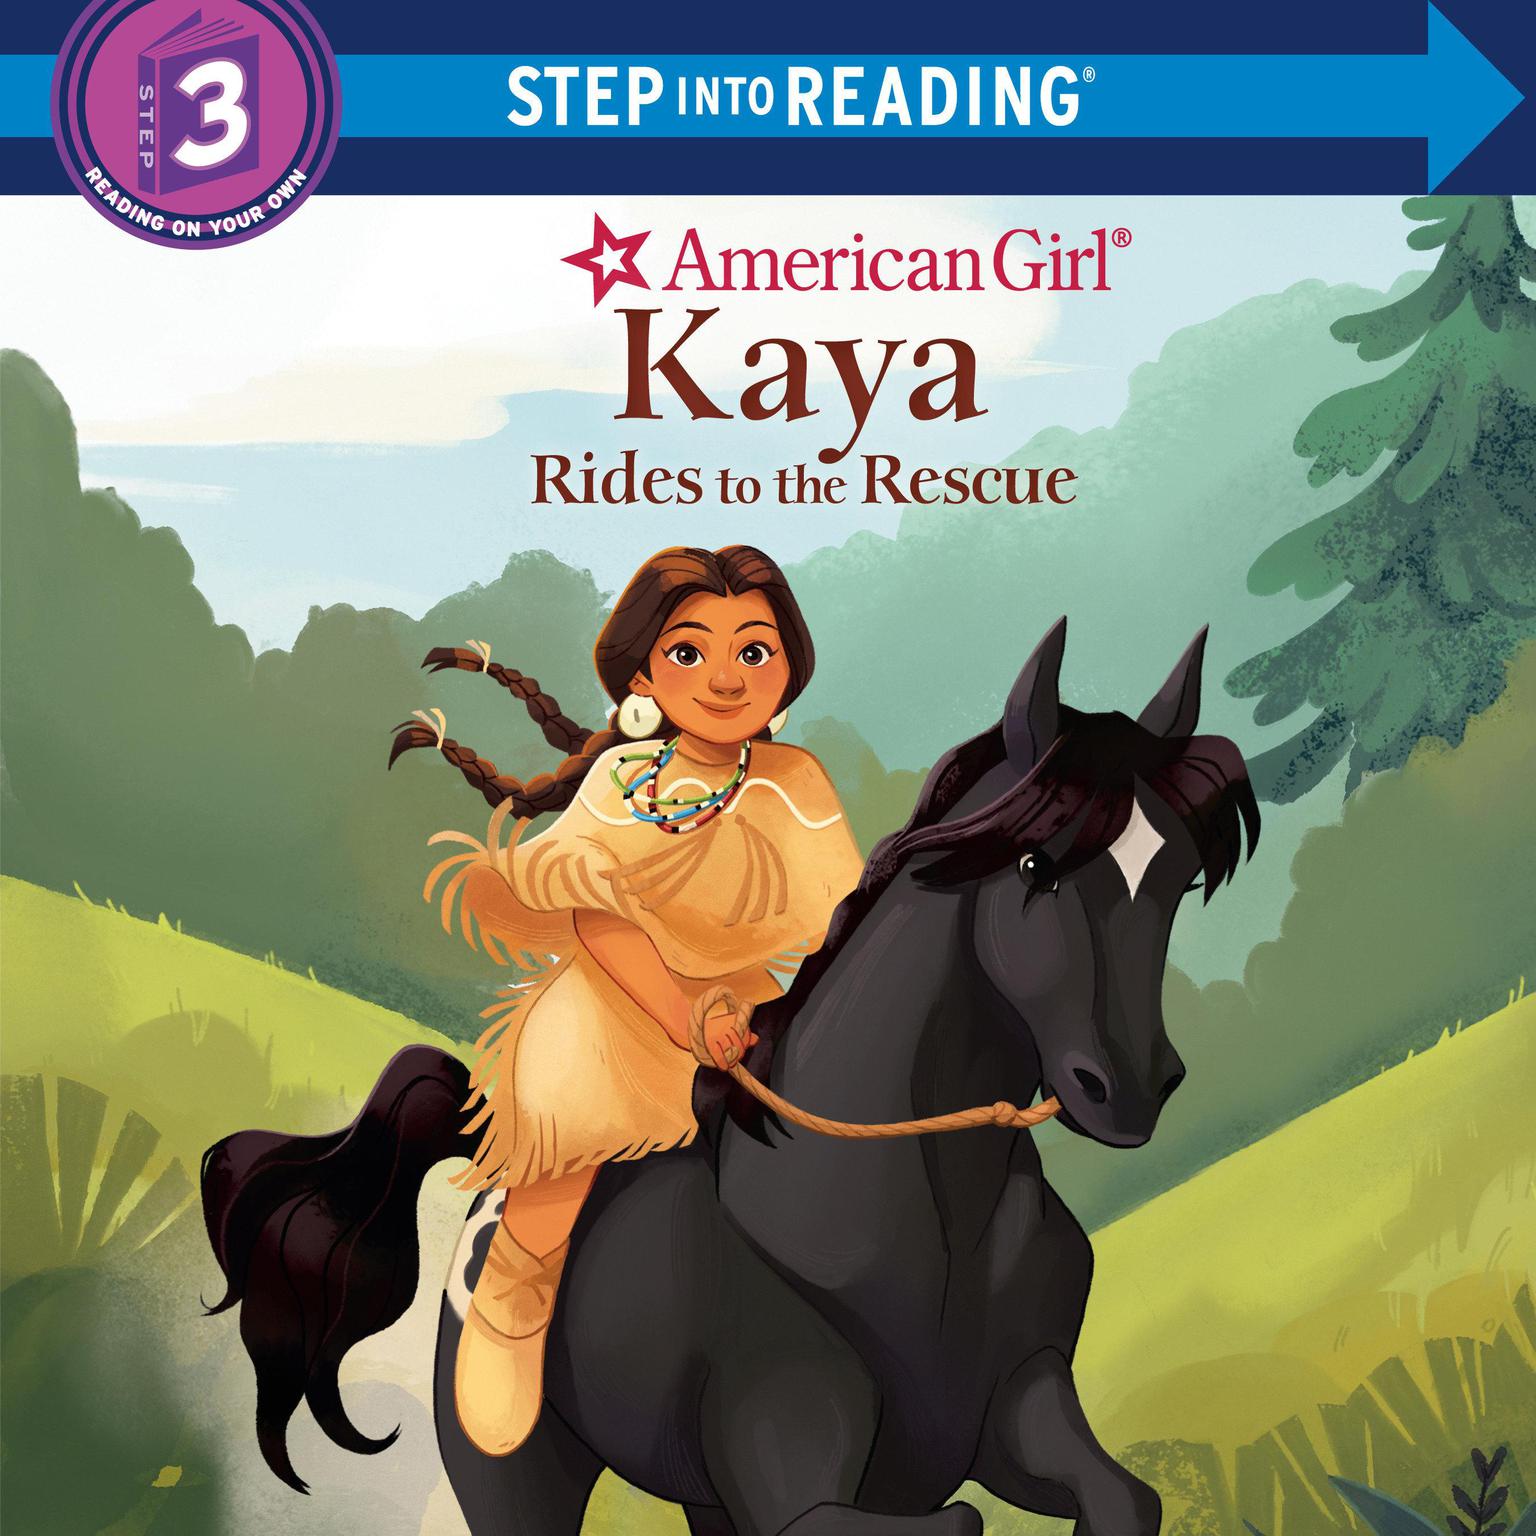 Kaya Rides to the Rescue (American Girl) Audiobook, by Emma Carlson Berne